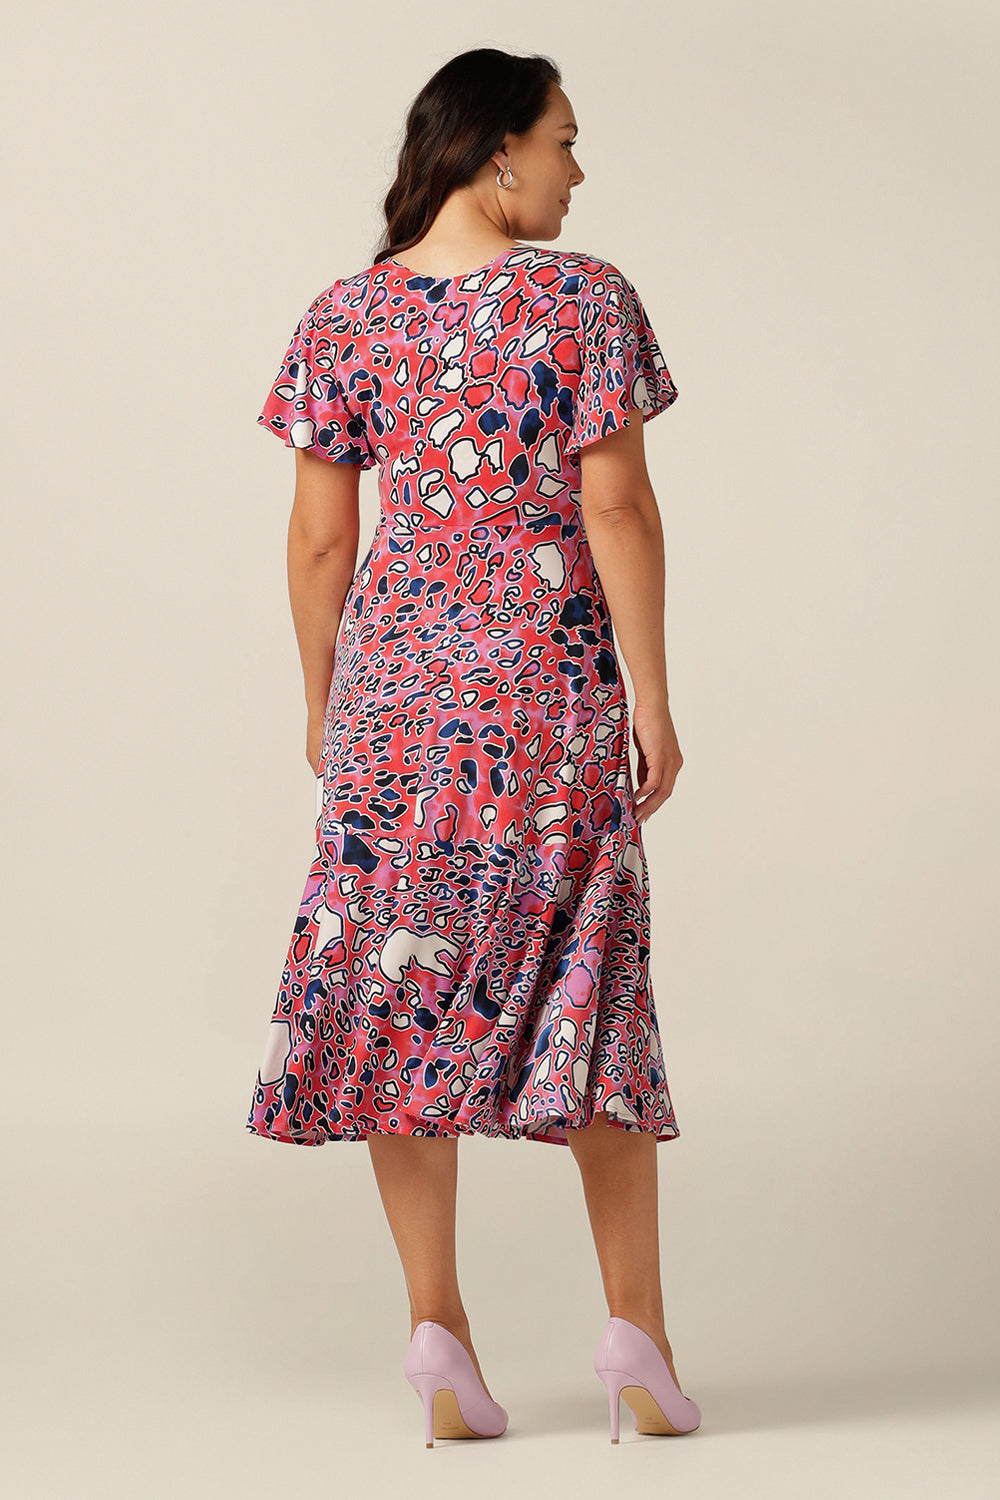 fixed wrap maxi dress with flutter sleeves, pockets and ruffle on skirt.